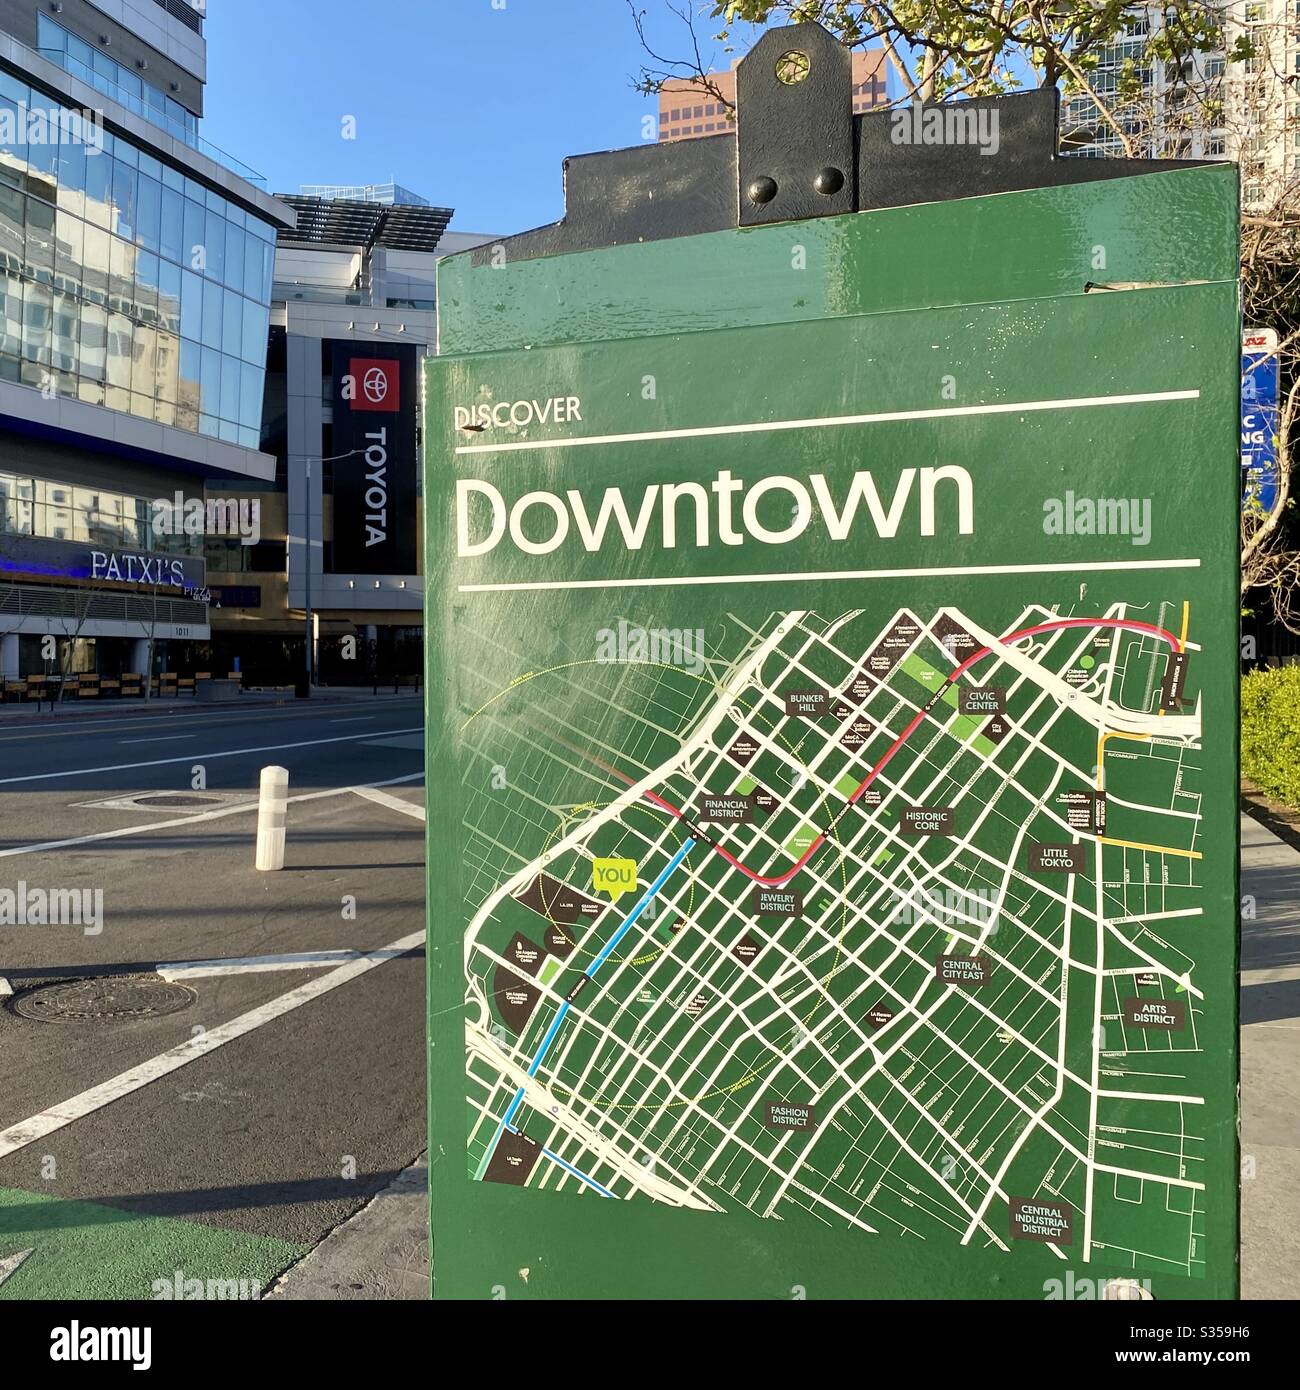 LOS ANGELES, CA, MAR 2020: close view Discover Downtown map on display in South Park Area, near LA Live and Staples Center sports and entertainment venues Stock Photo